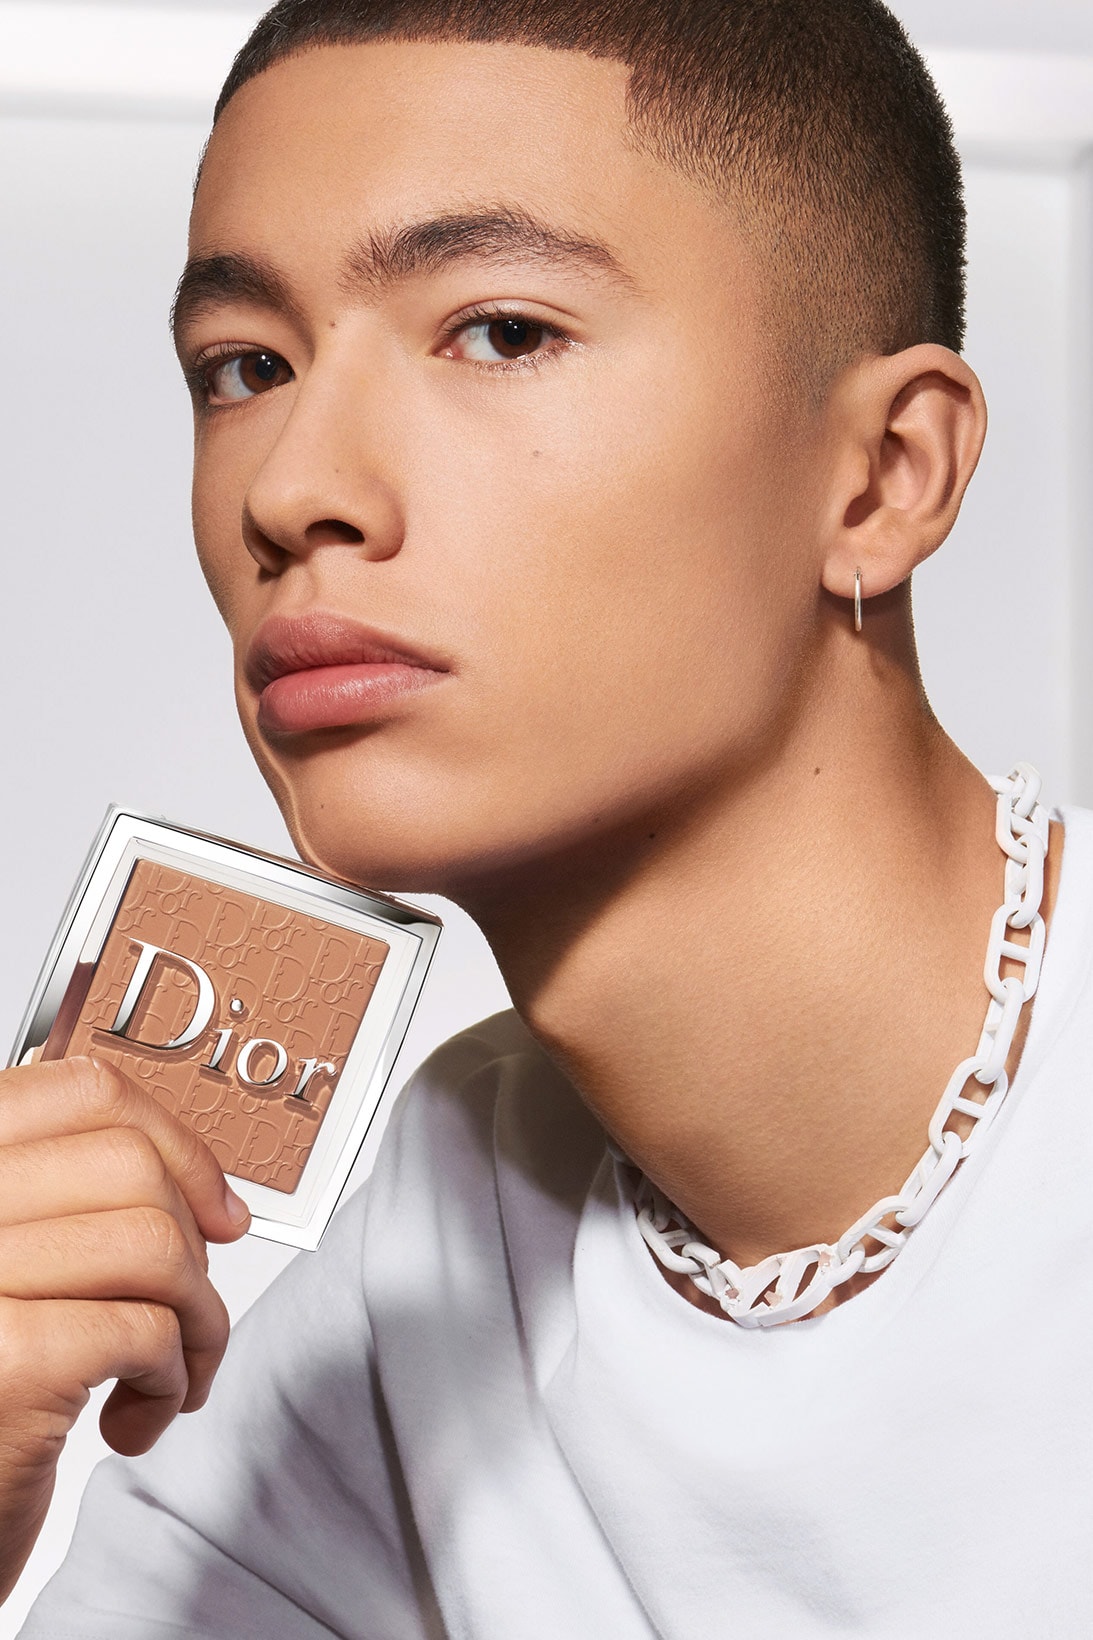 dior beauty face and body powder foundation makeup peter philips